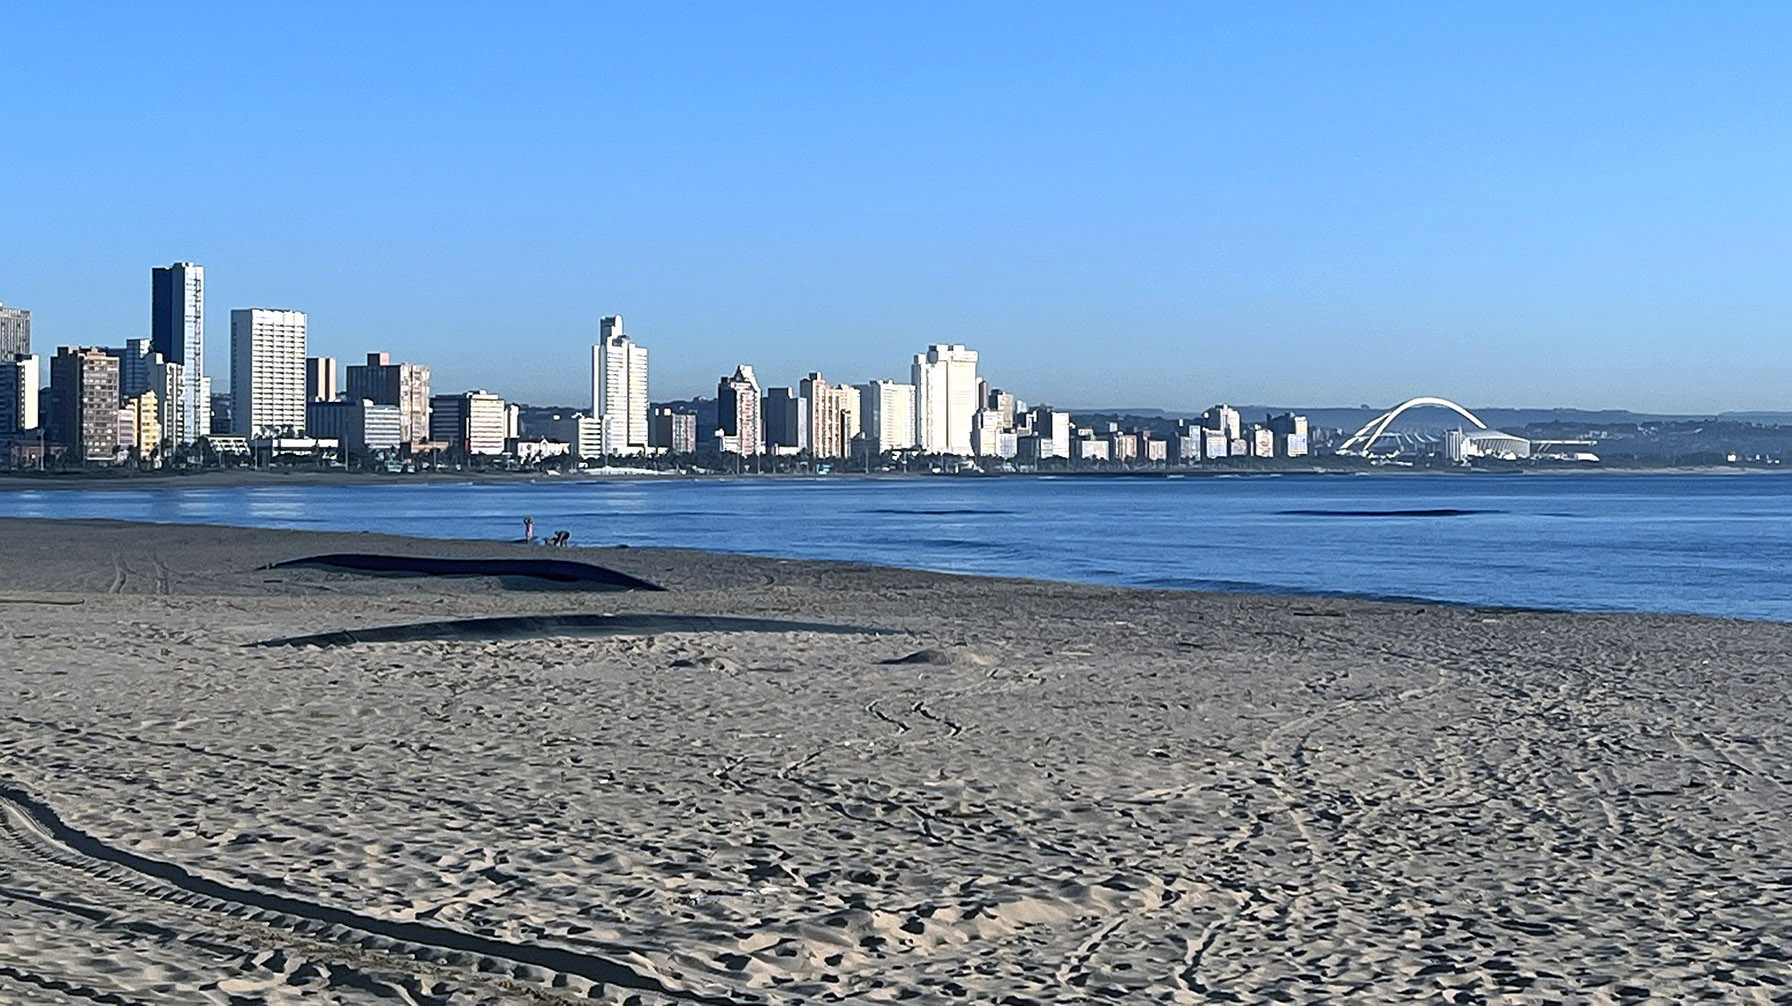 The view of North Beach from Durban harbour.